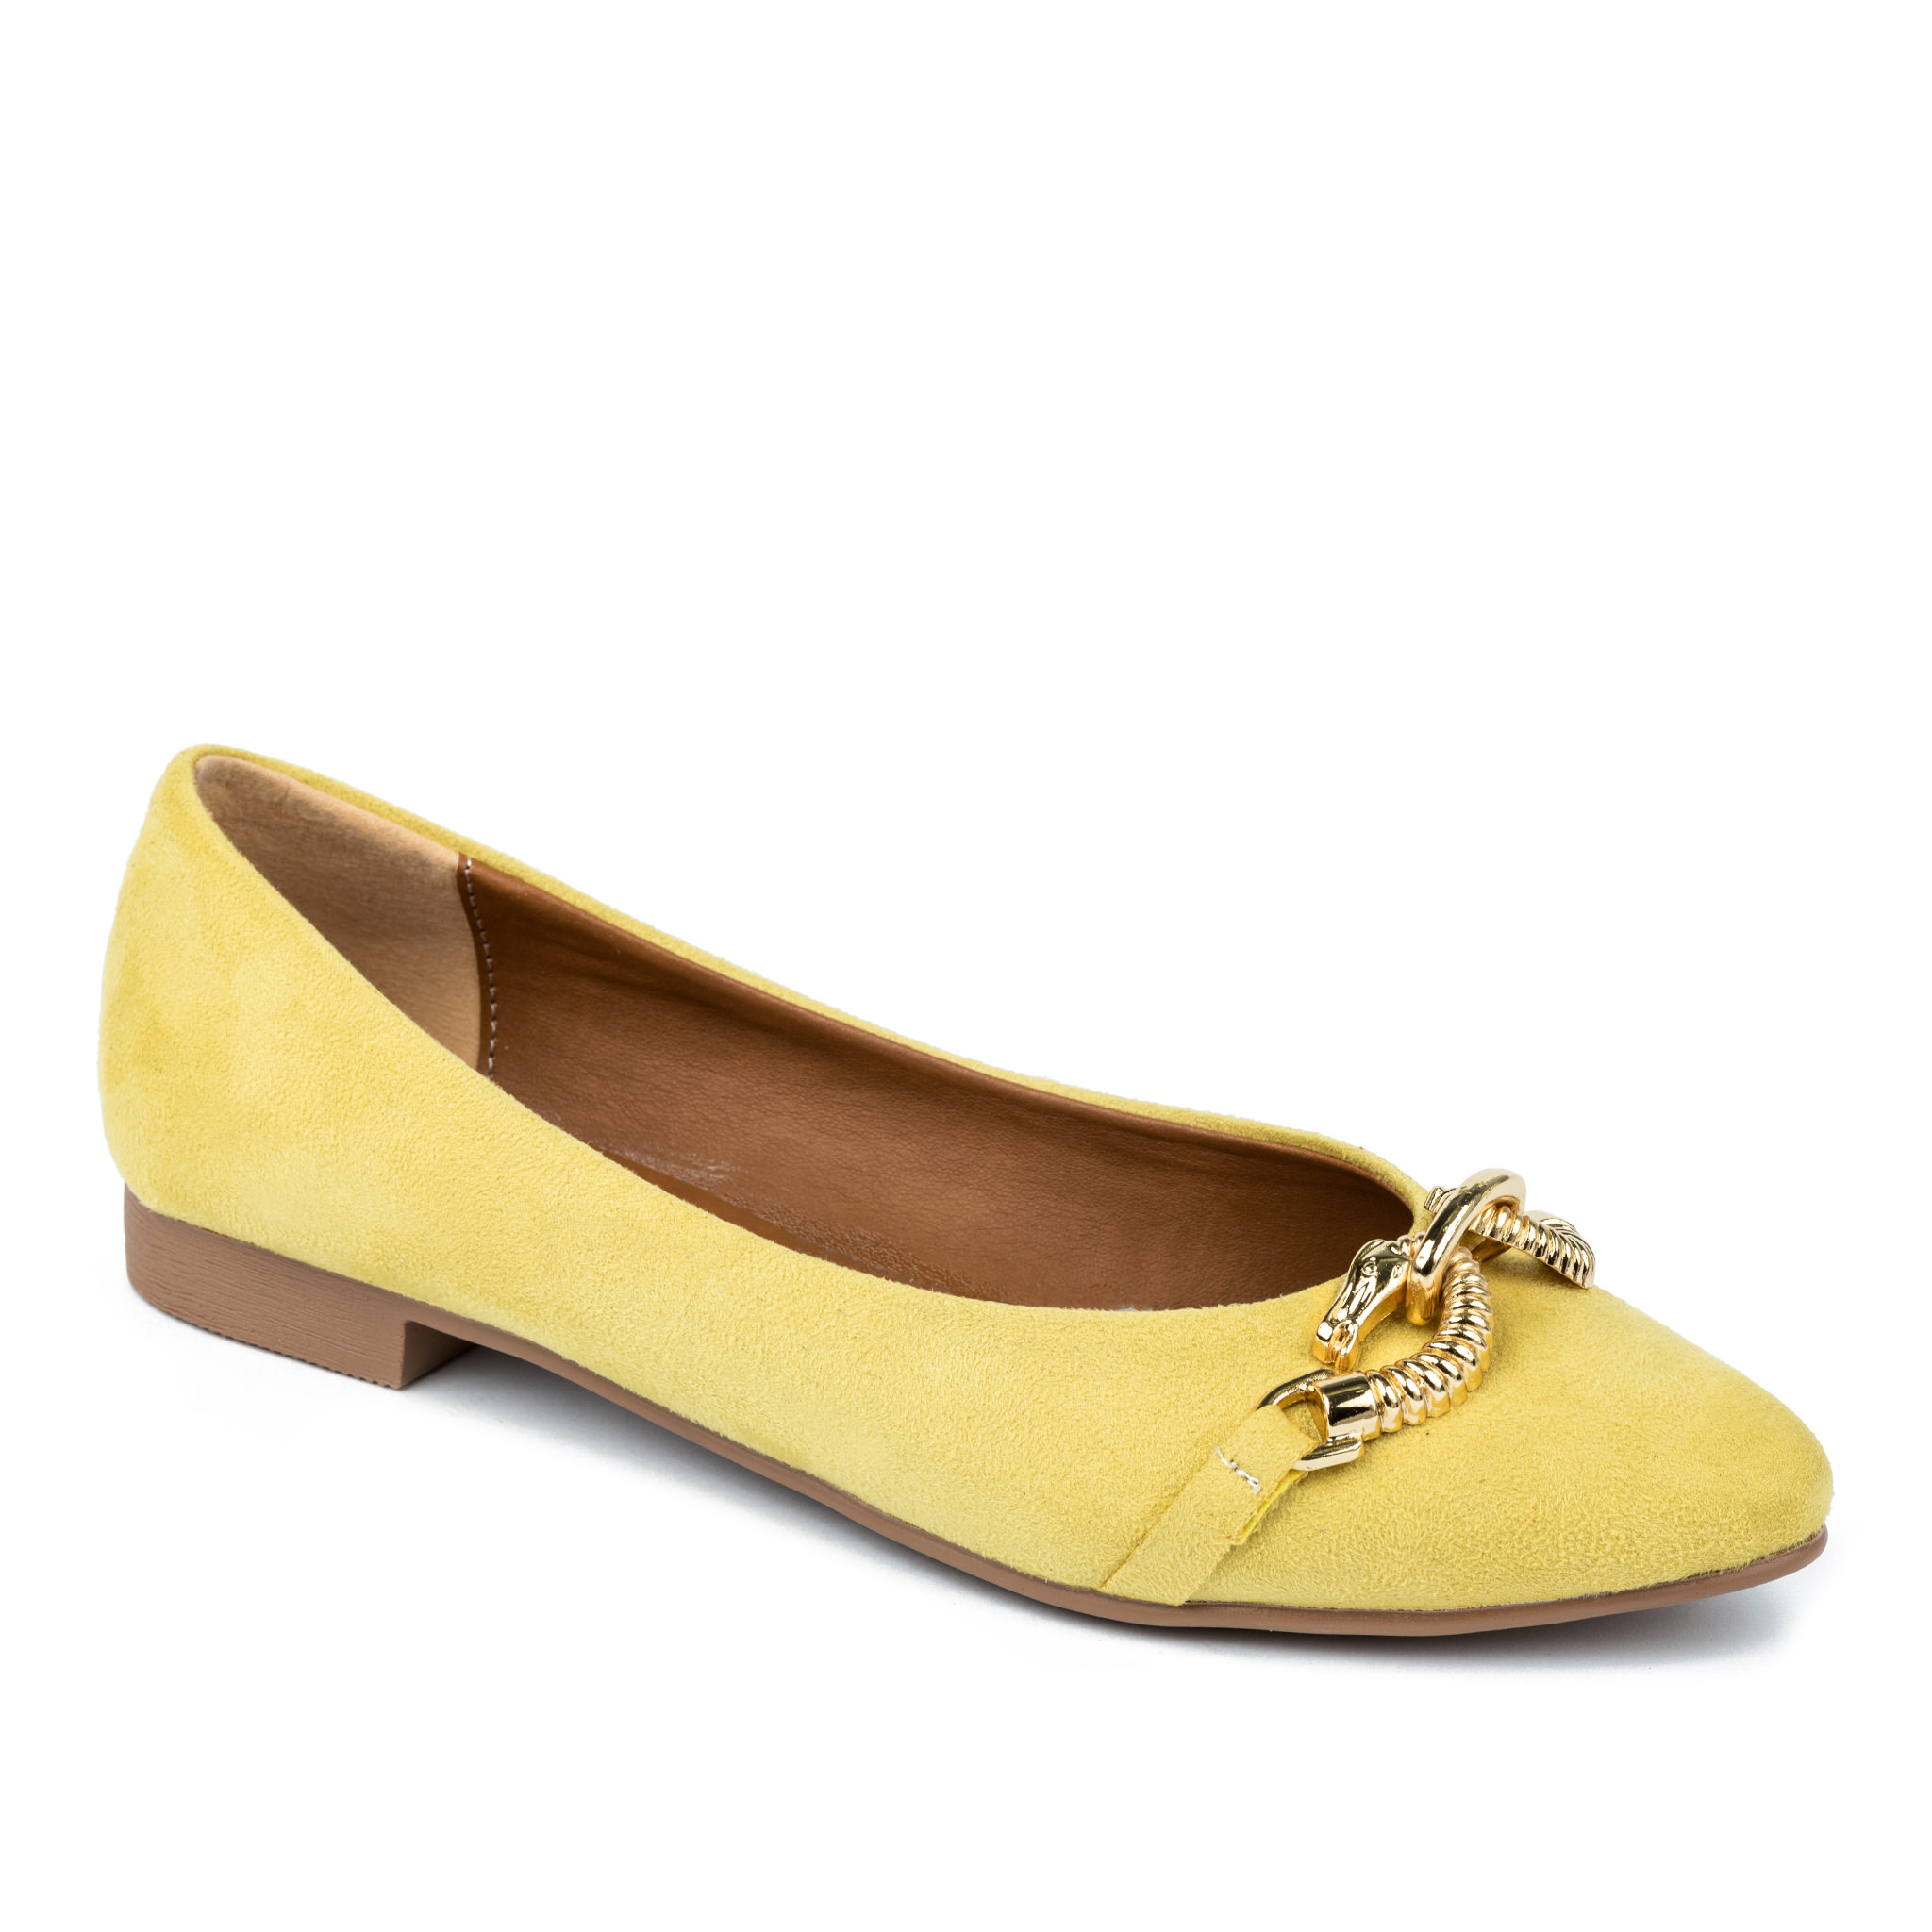 VELOUR FLATS WITH ORNAMENTS - YELLOW